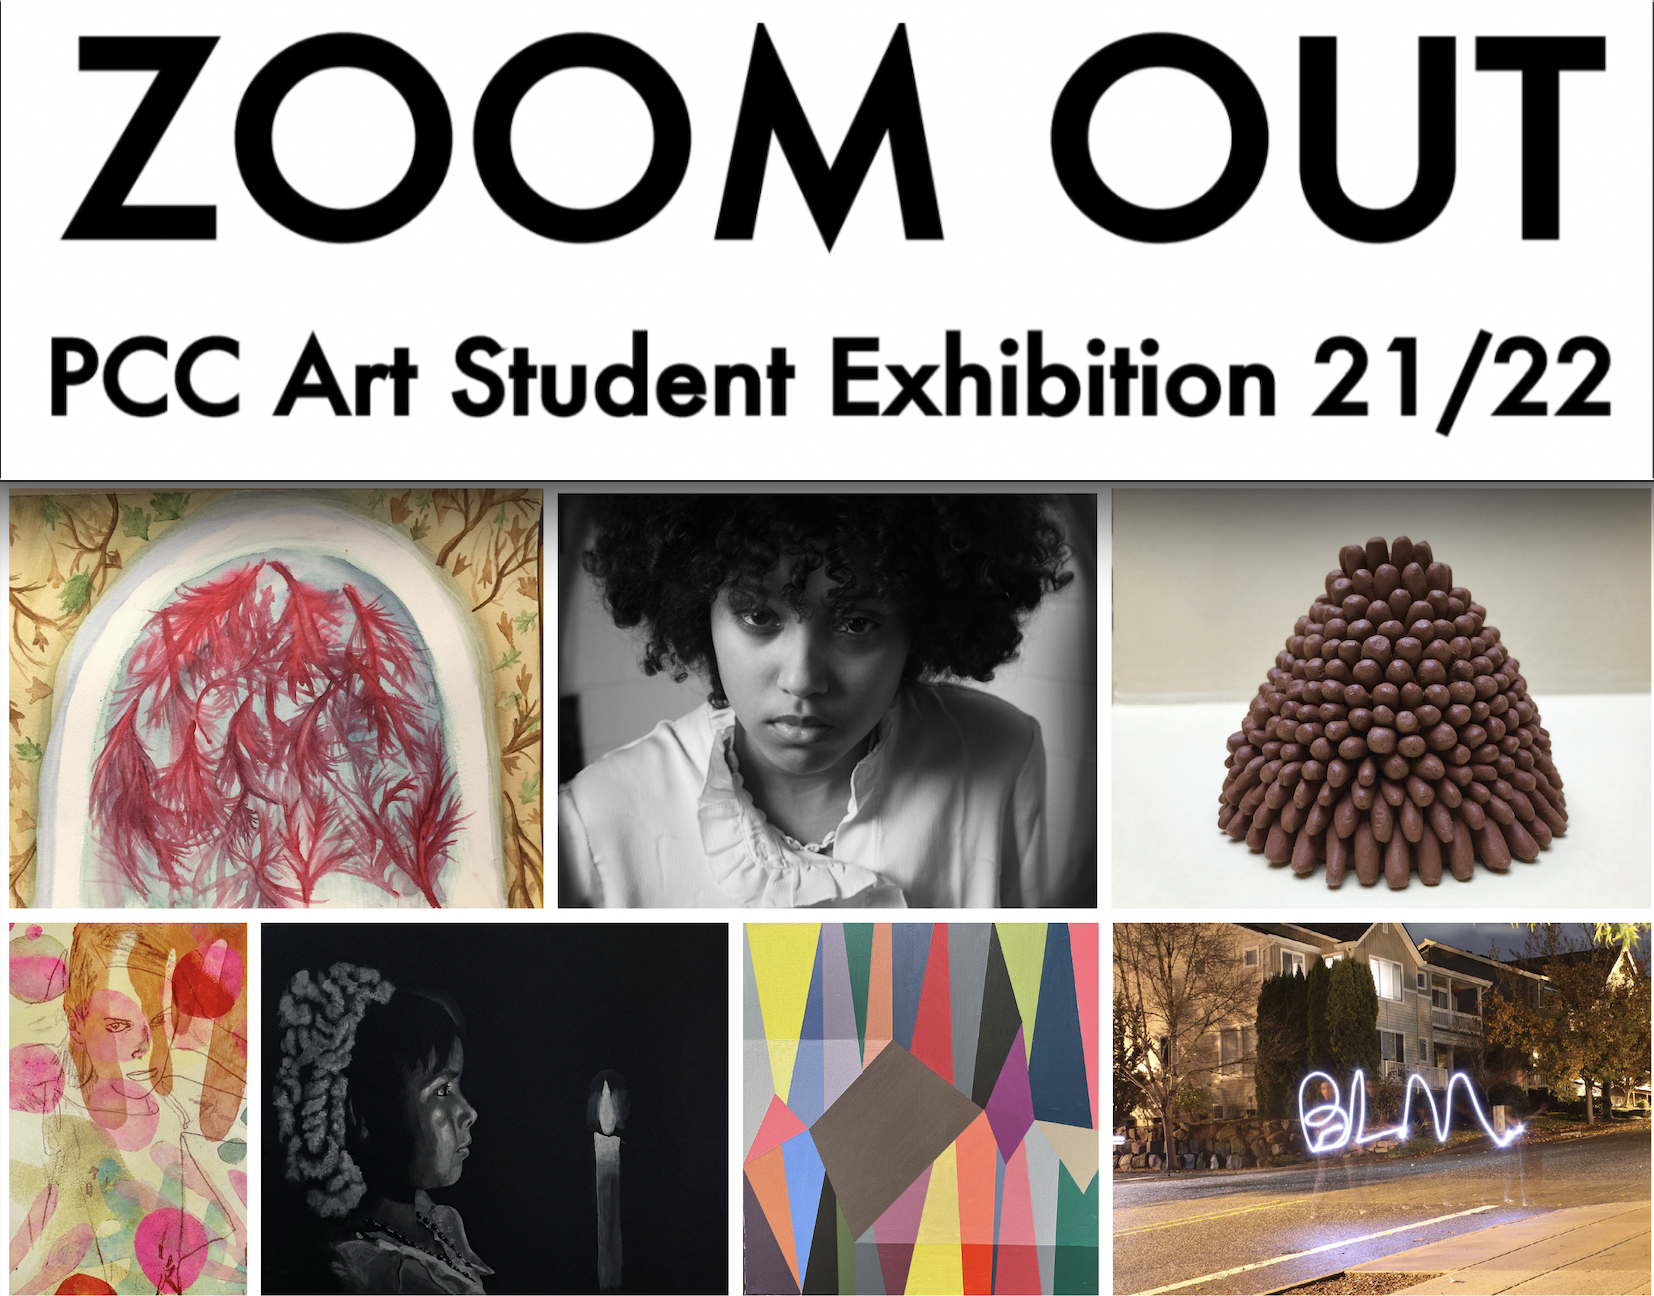 Exhibition title Zoom Out with a collage of student work.